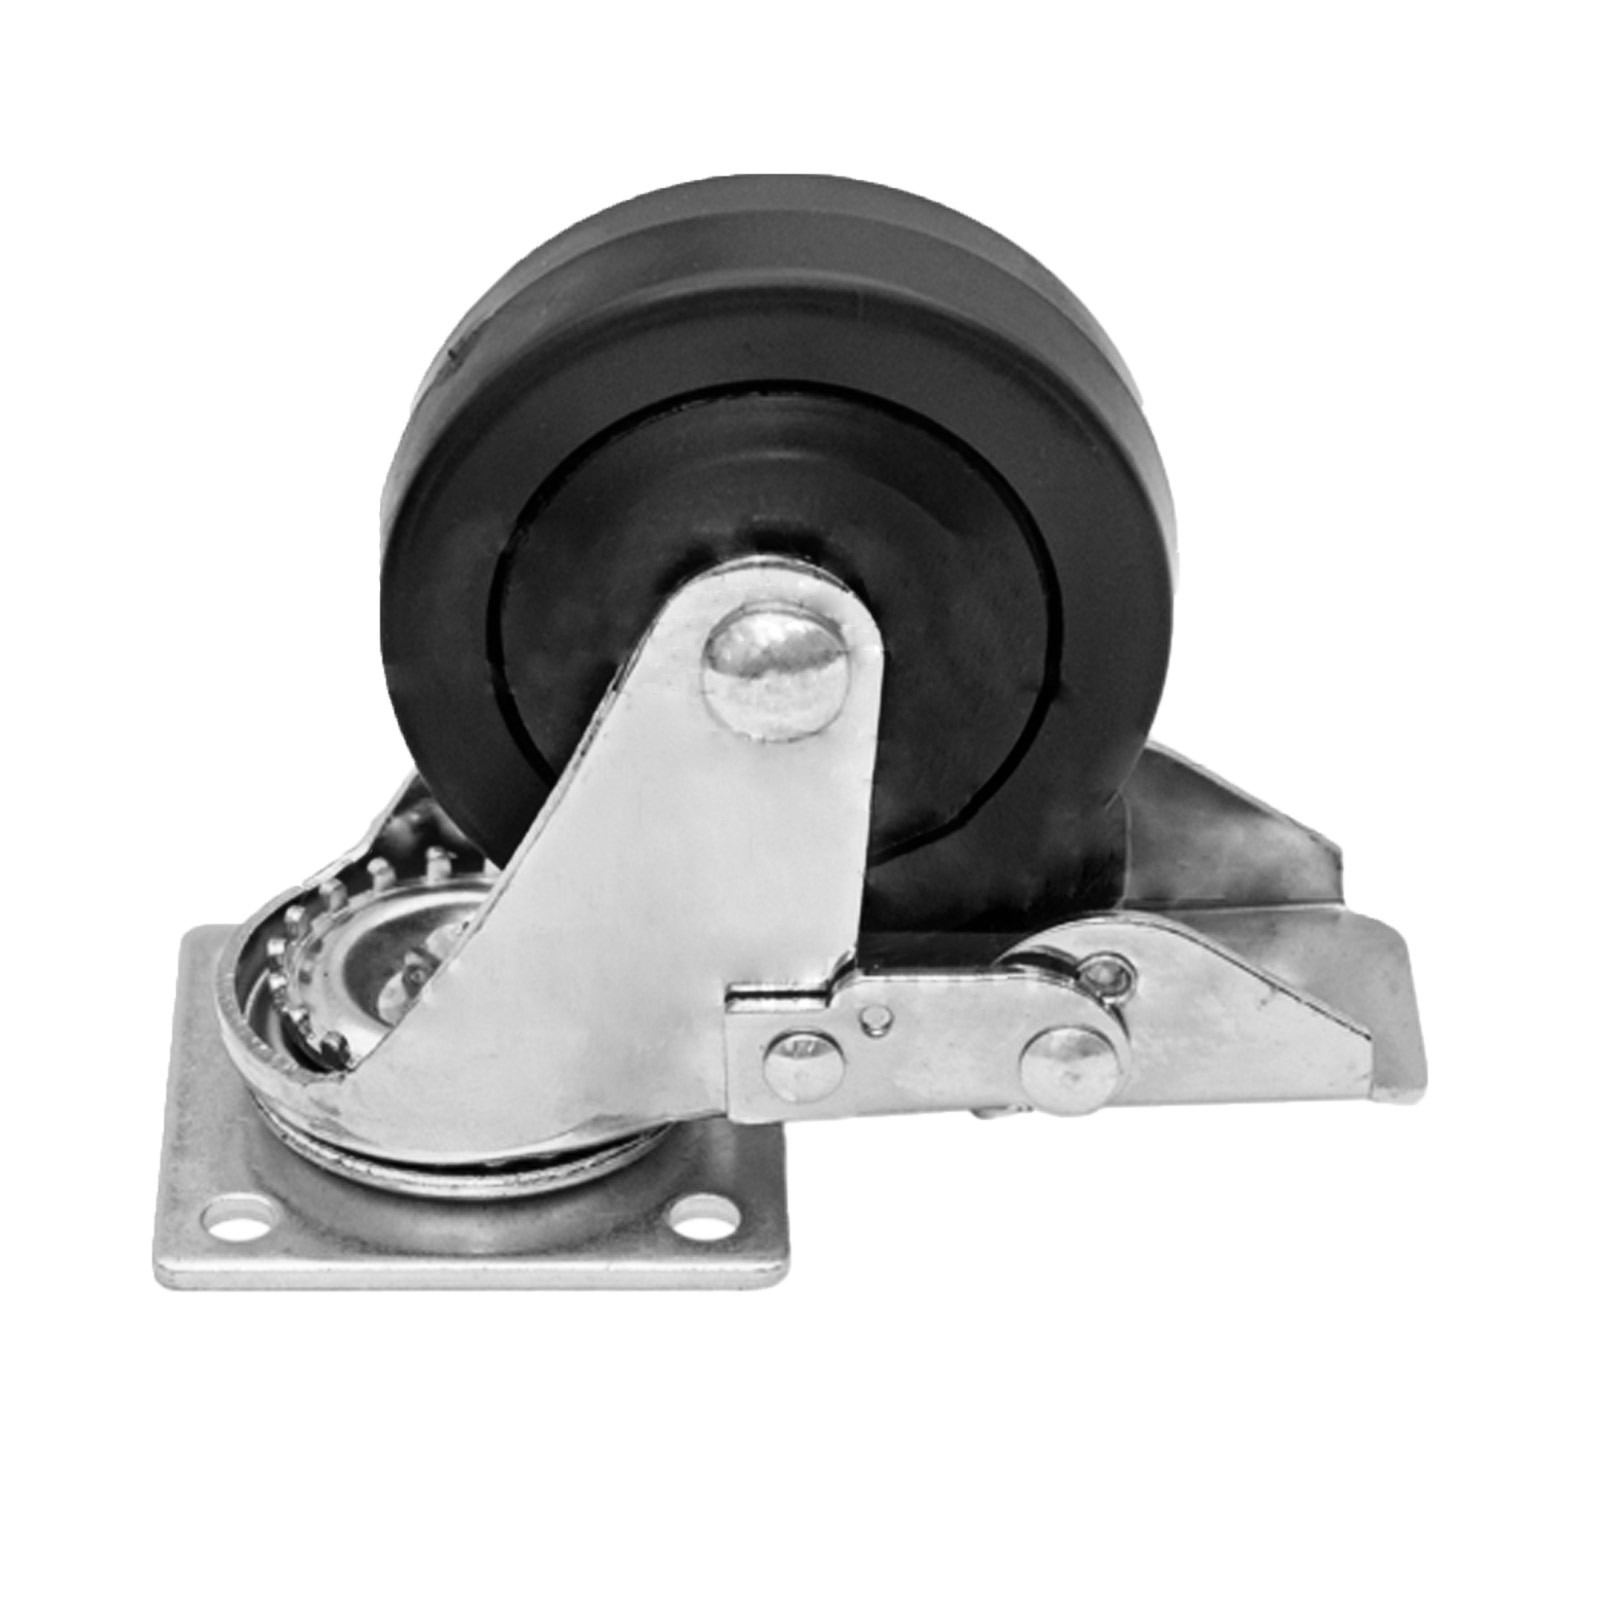 Global Truss St-180-Smcast – Replacement Small Swivel Side Caster For St-180 341264 Accessories Digital DJ Gear